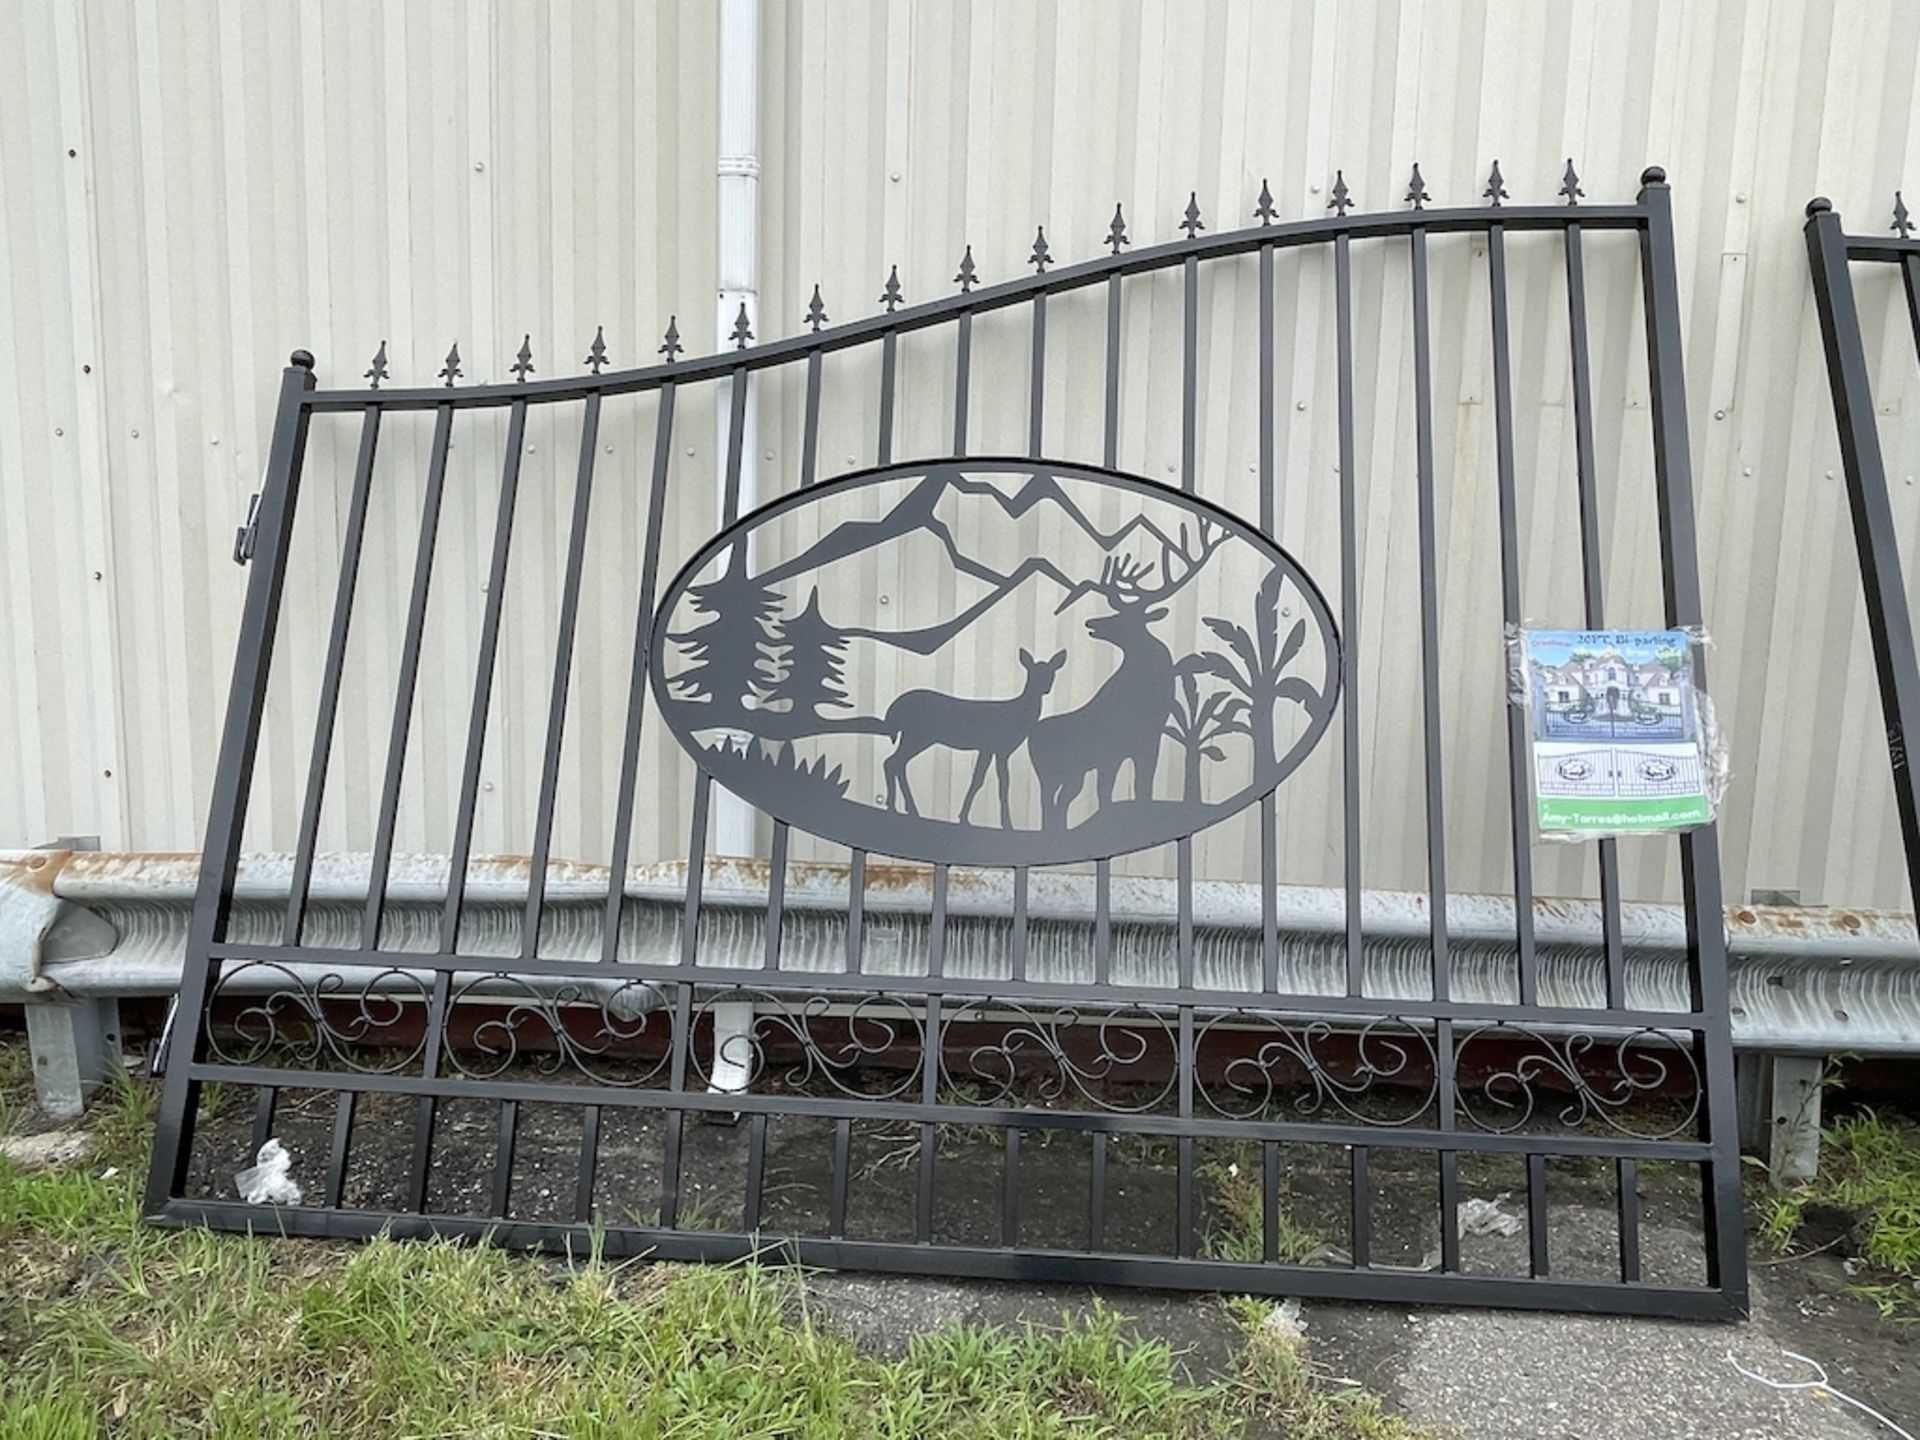 Brand New Unused Greatbear 20ft Wrought Iron Gate (NY119) - Image 2 of 7